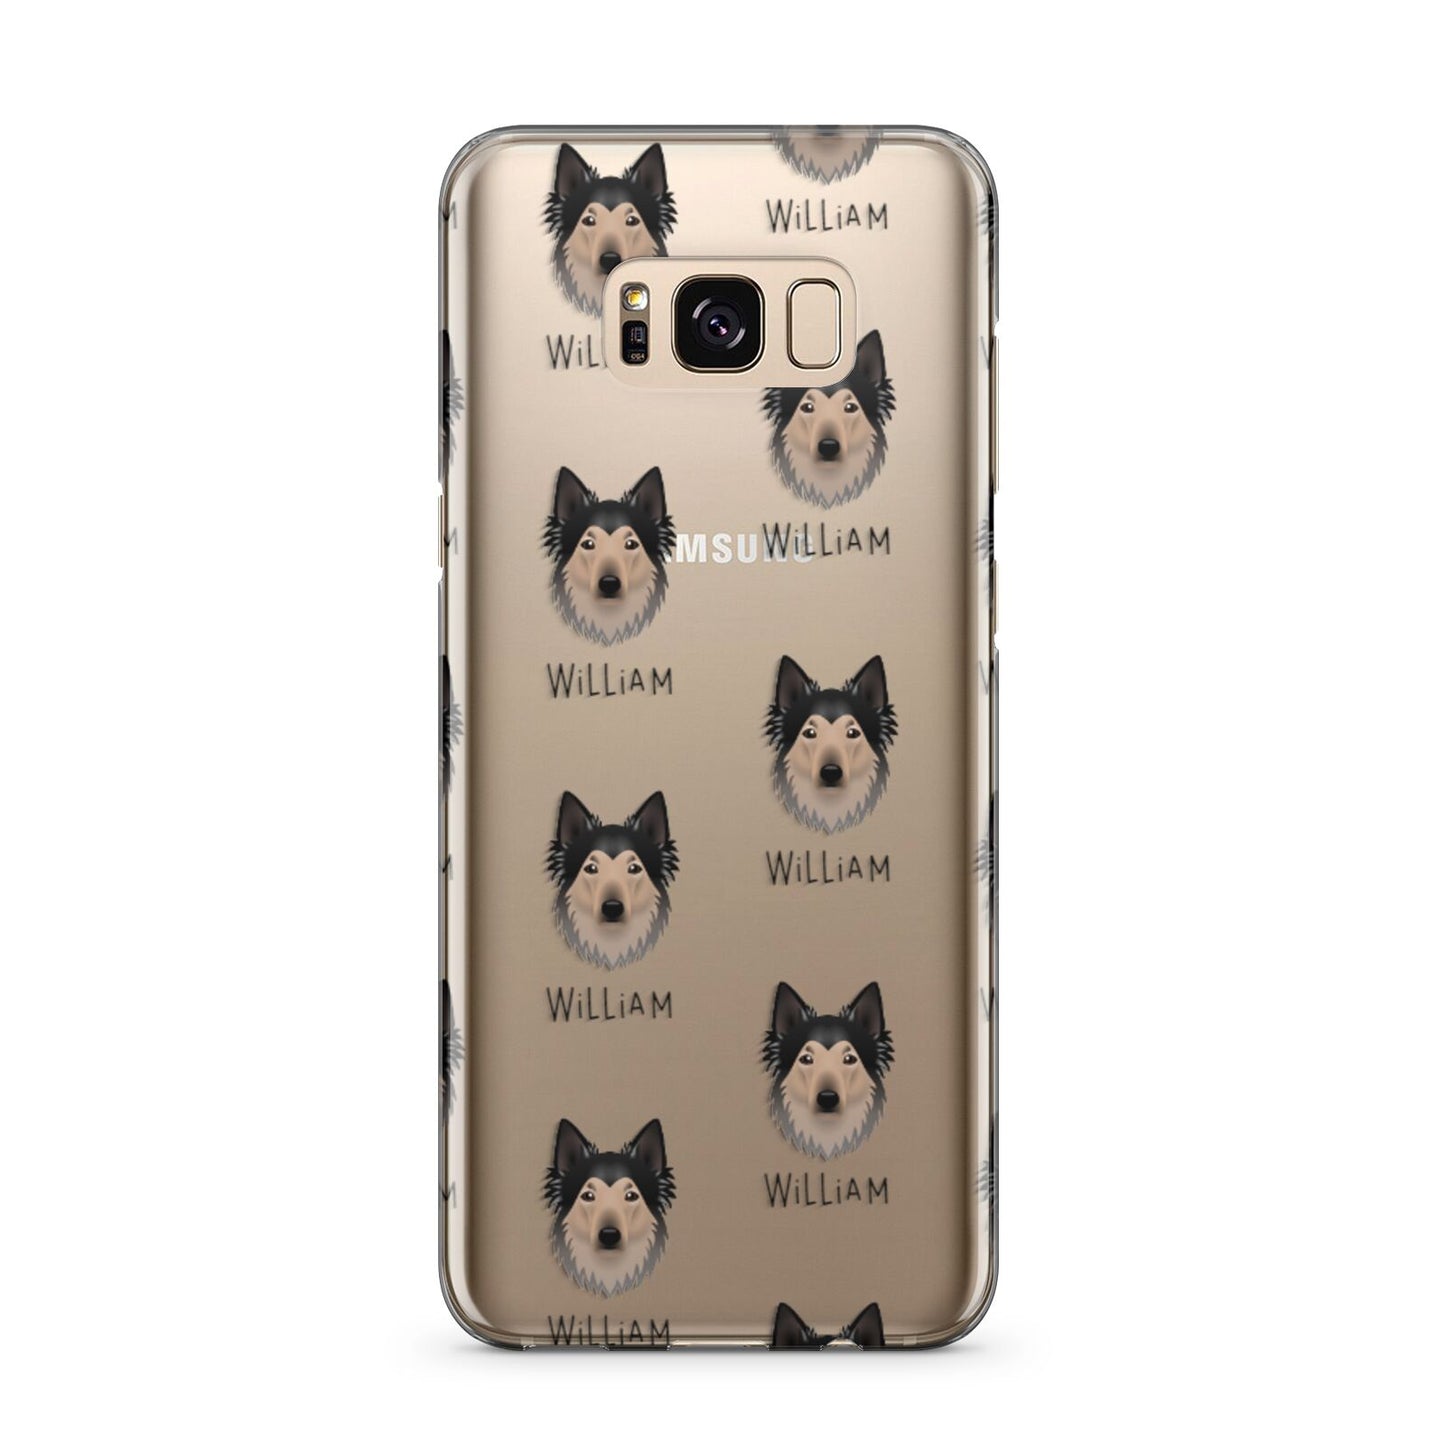 Shollie Icon with Name Samsung Galaxy S8 Plus Case